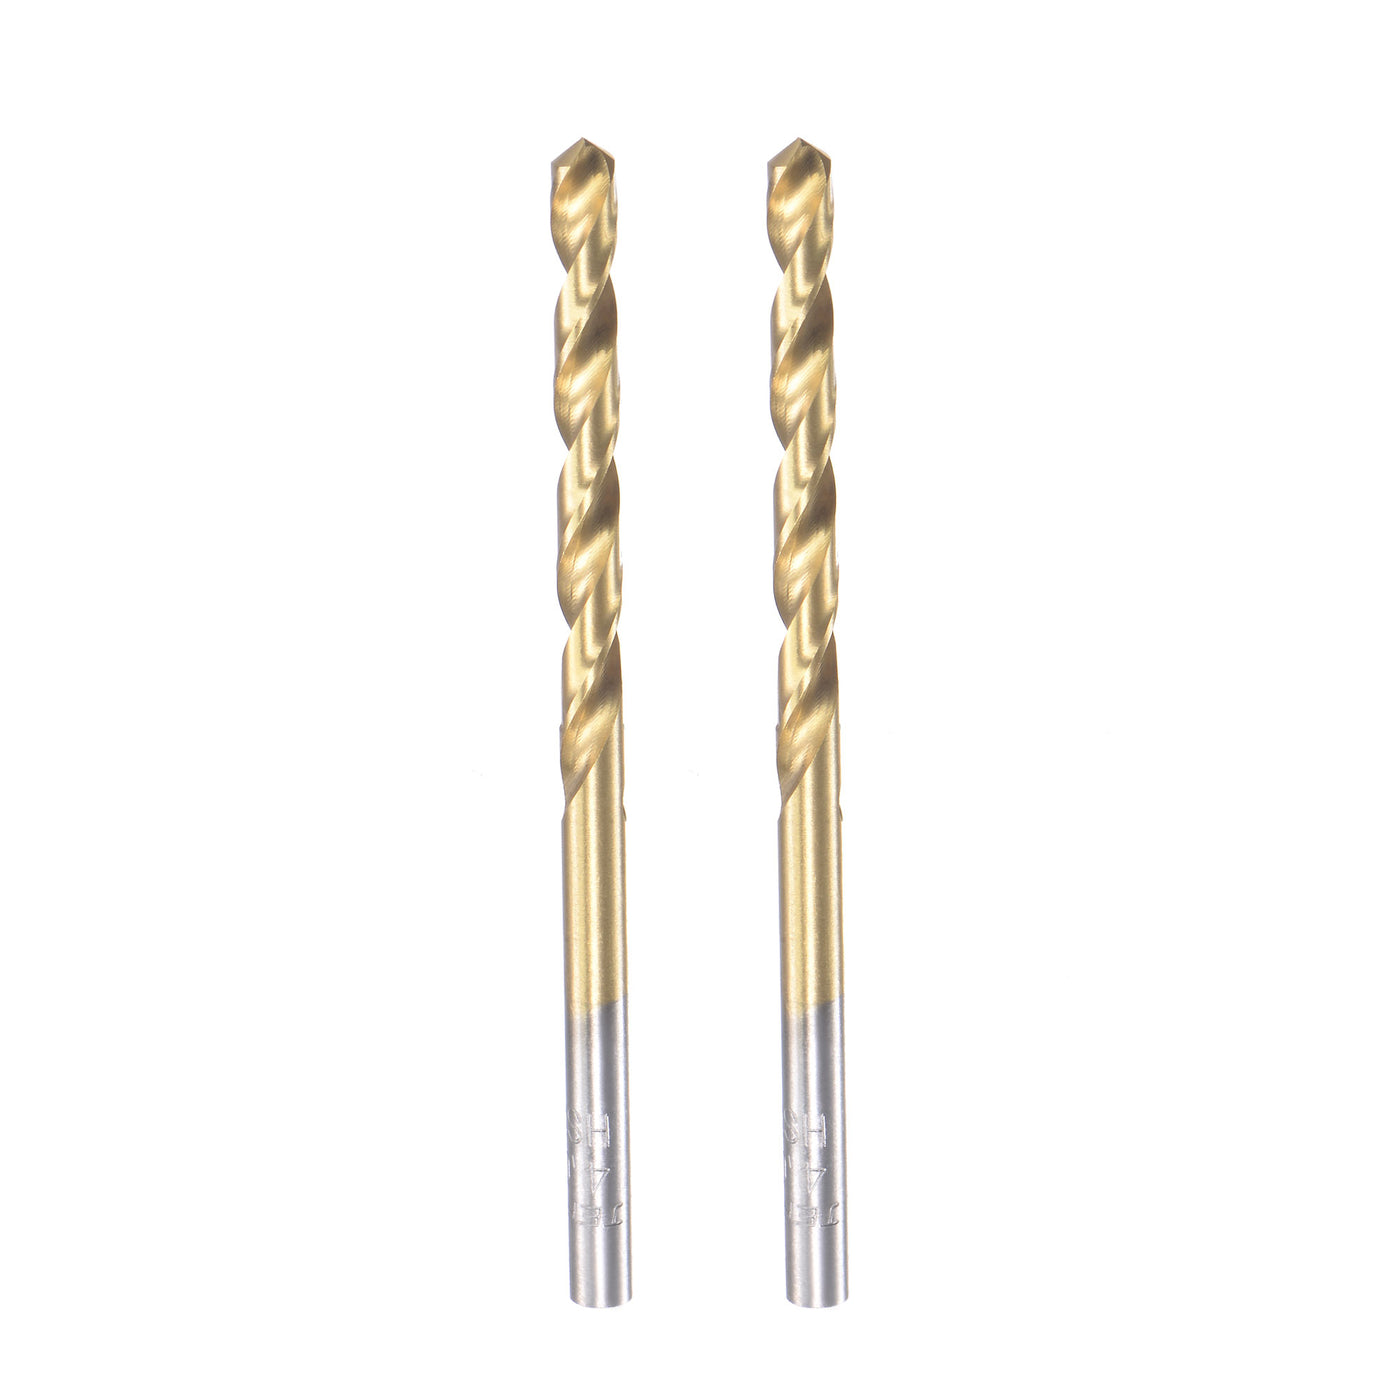 uxcell Uxcell High Speed Steel Twist Drill Bit 4mm Fully Ground Titanium Coated 2 Pcs